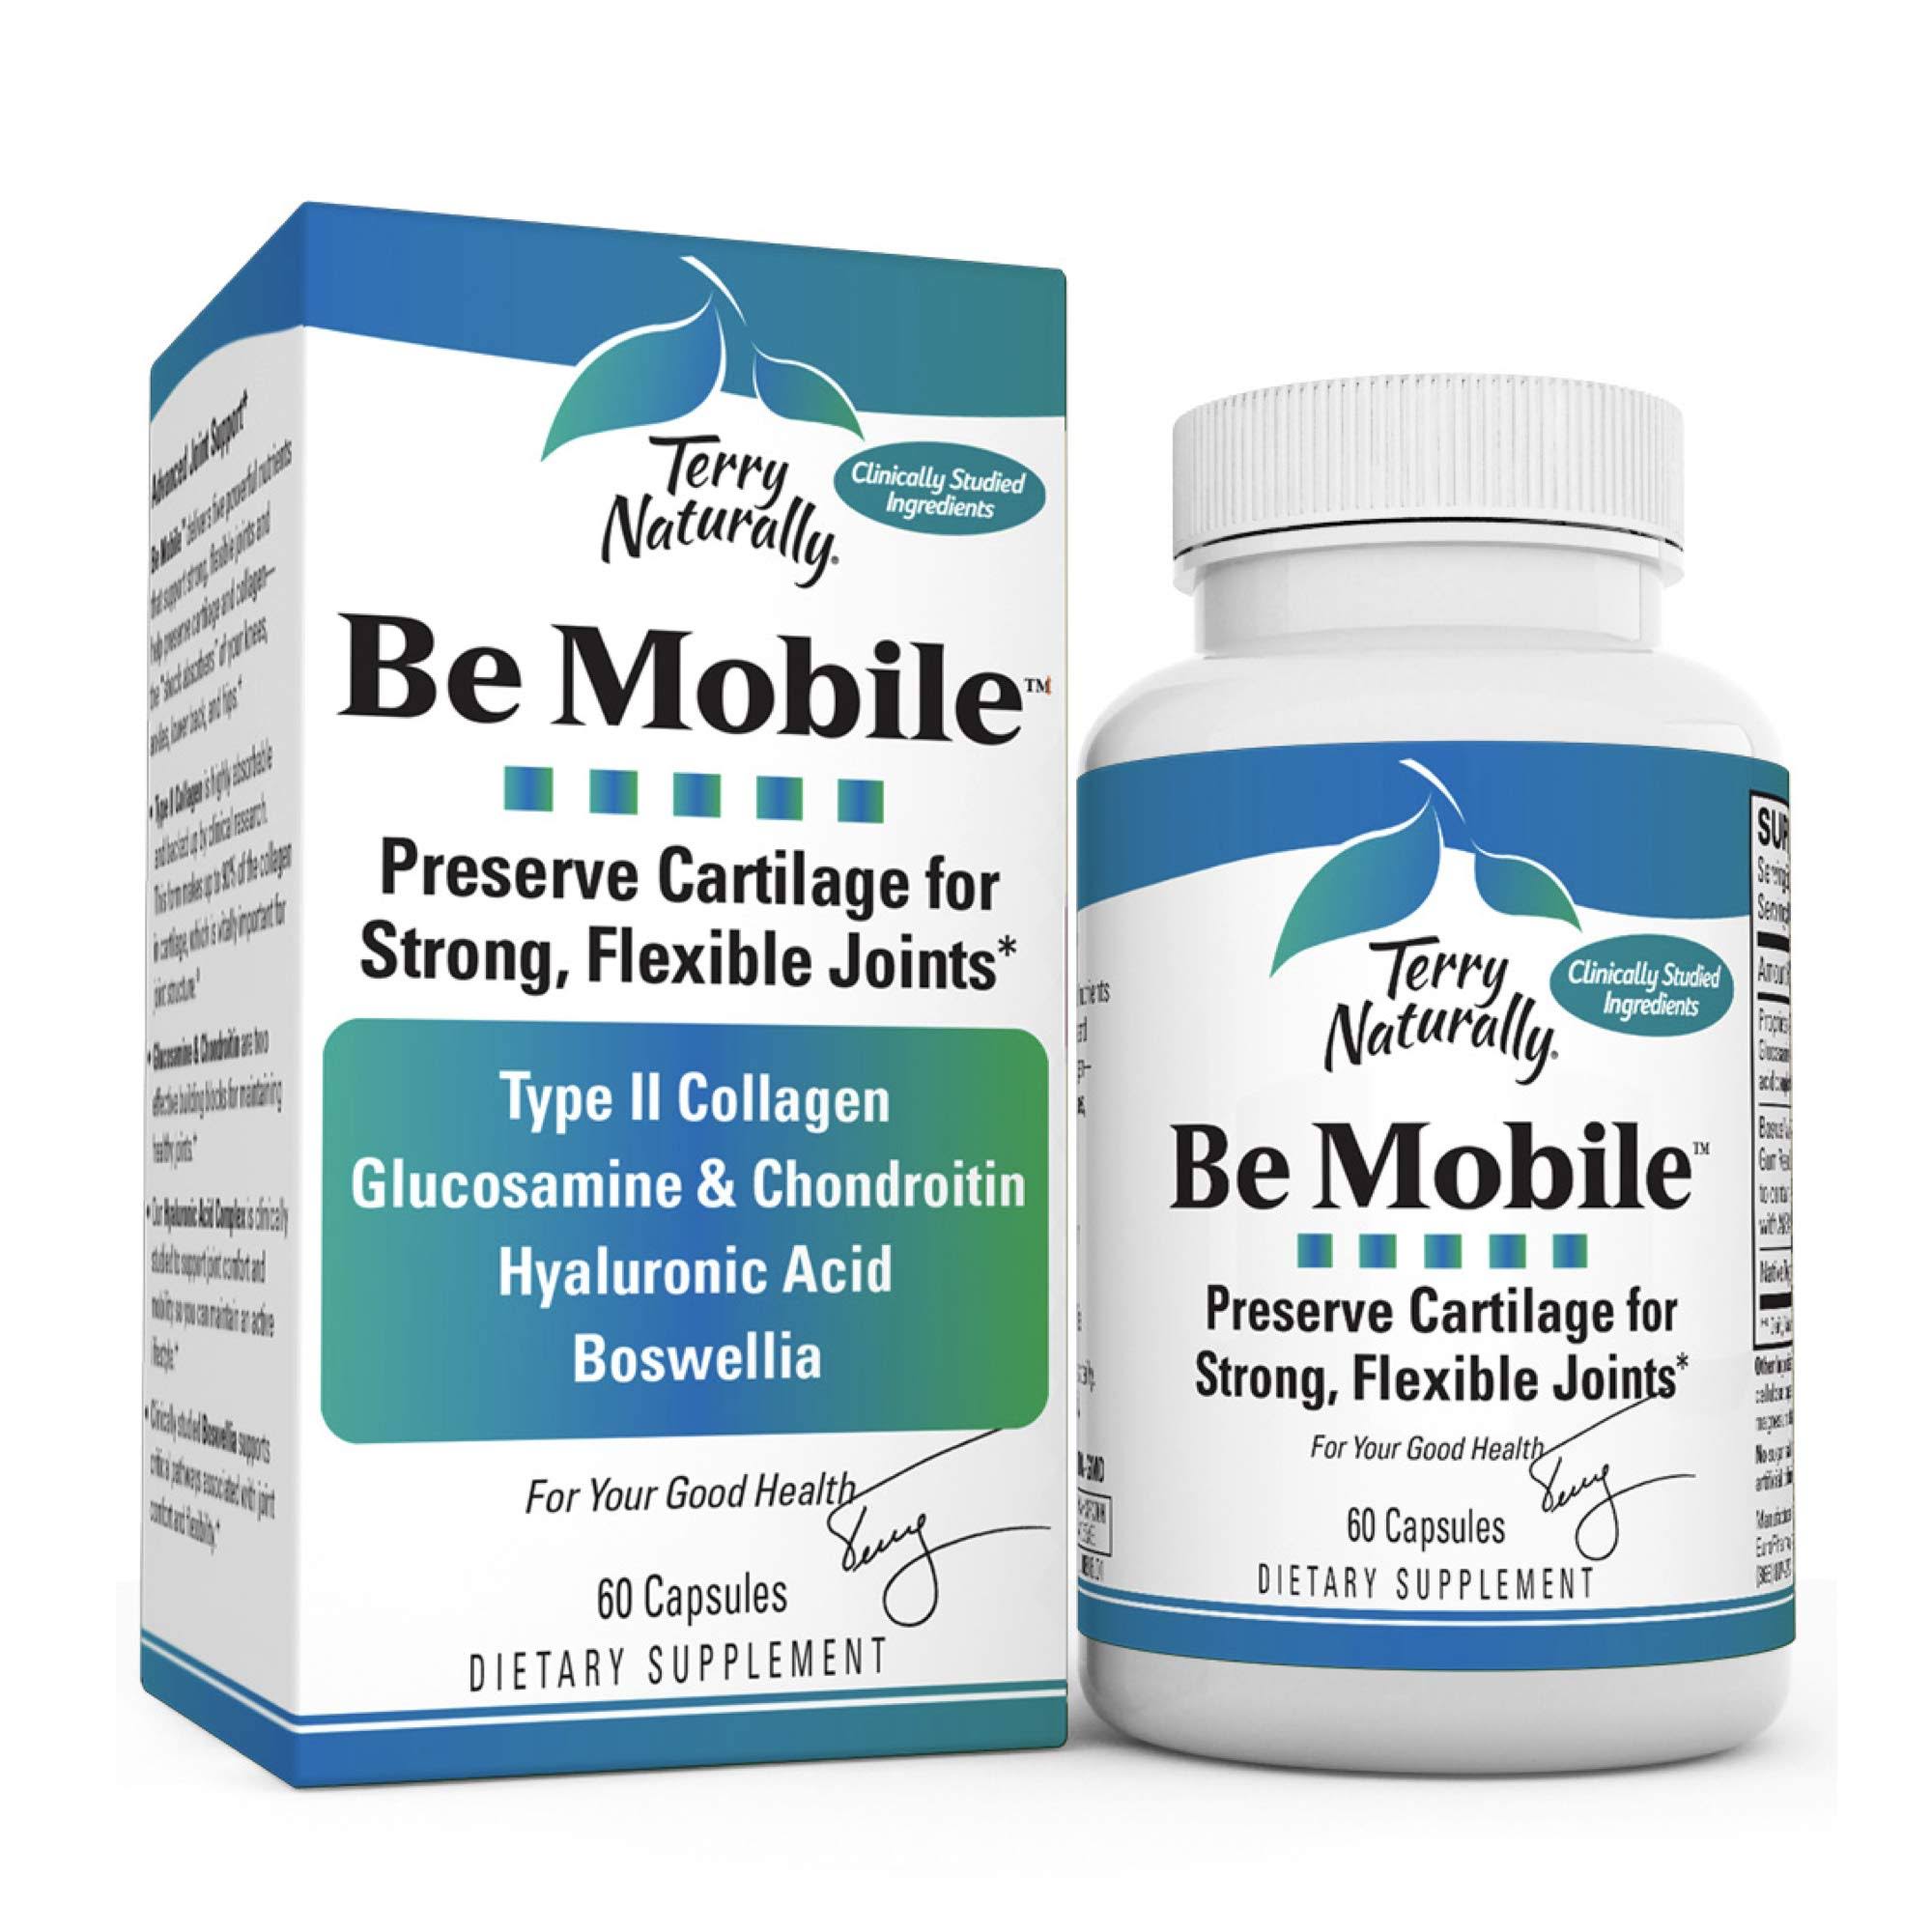 Terry Naturally Be Mobile 60 Capsules